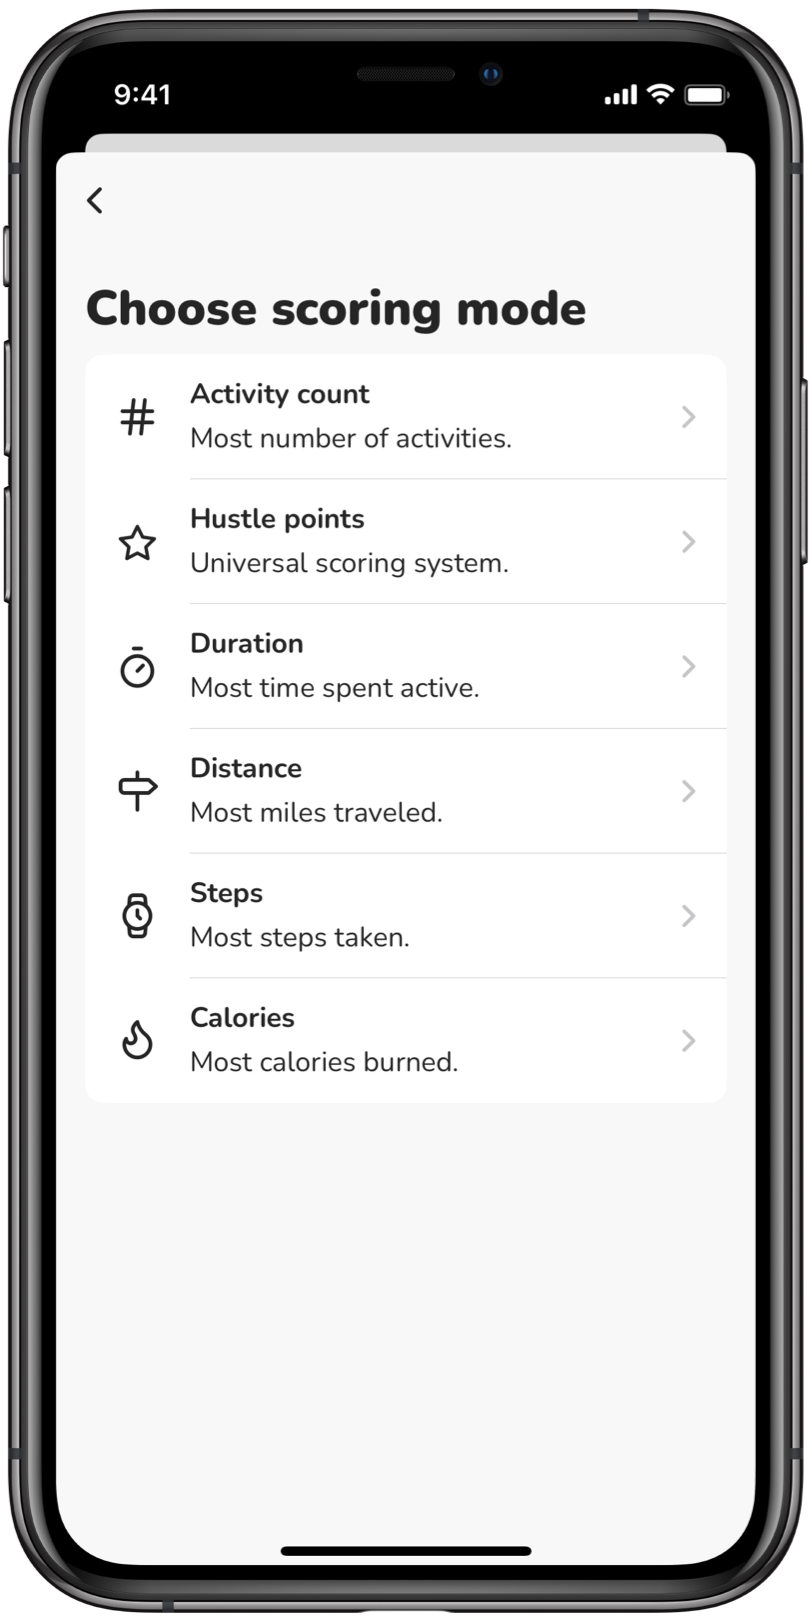 GymRats · Fitness challenge by Avocado Apps, LLC